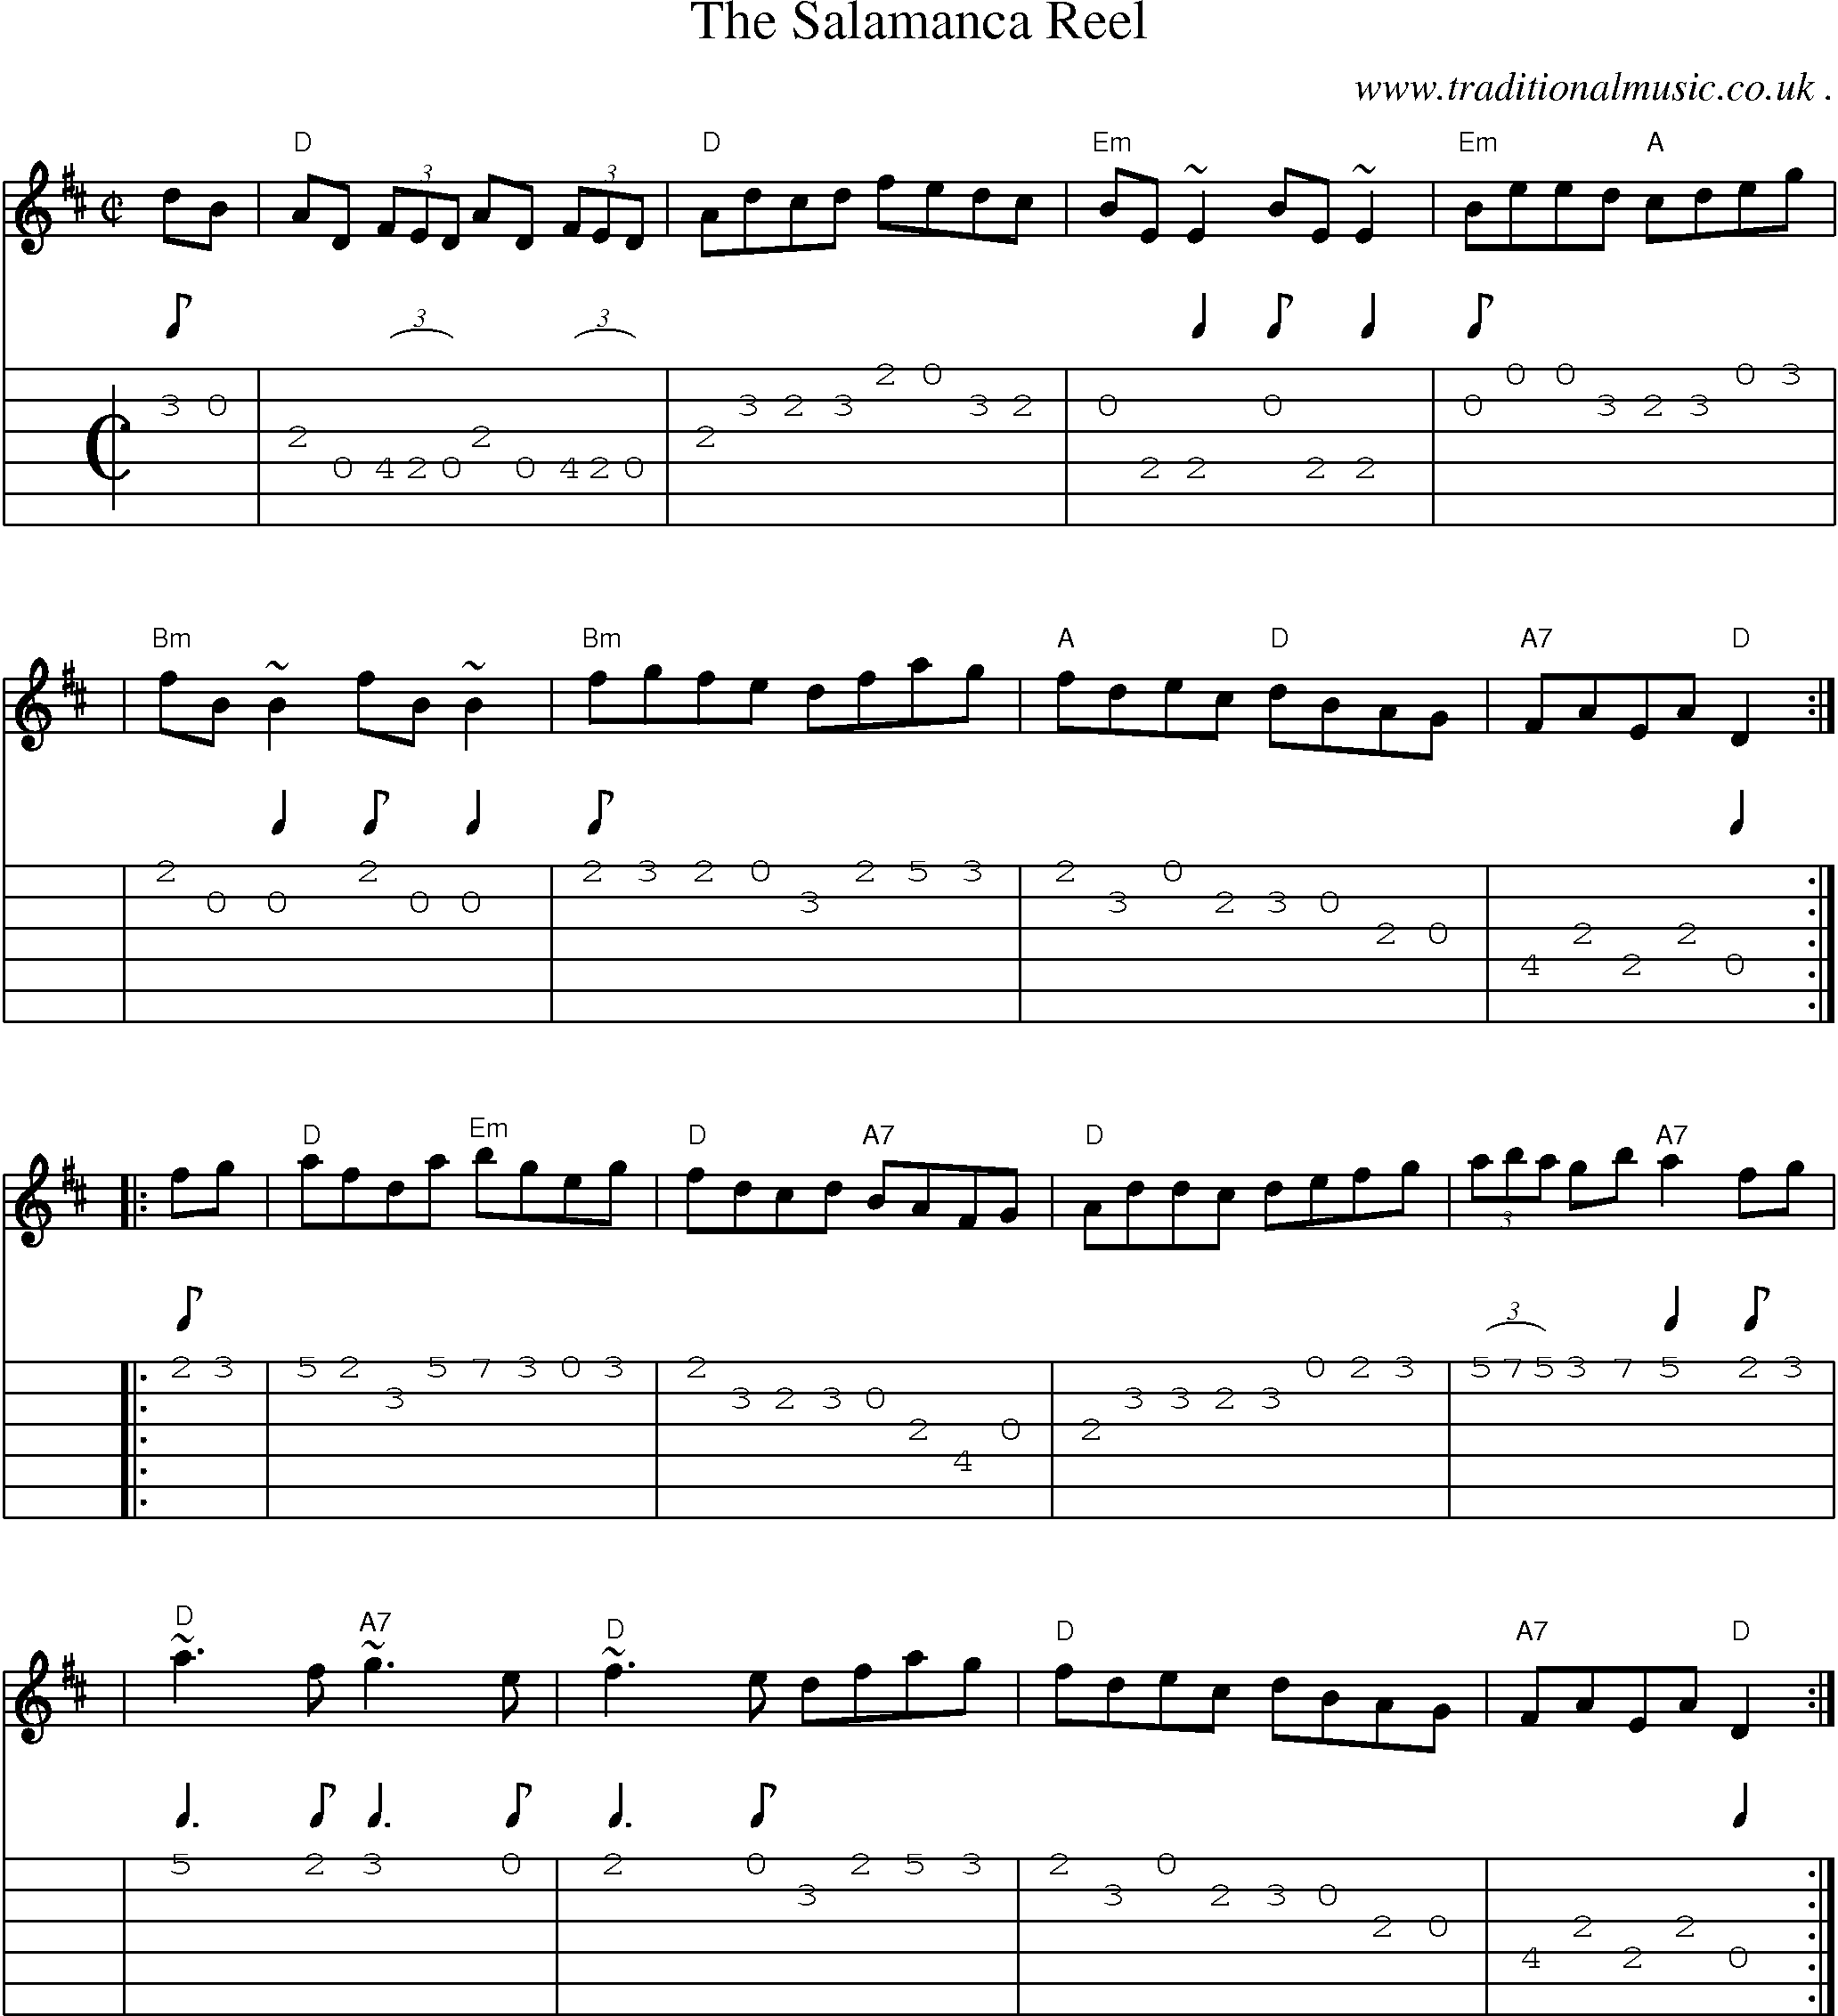 Sheet-music  score, Chords and Guitar Tabs for The Salamanca Reel